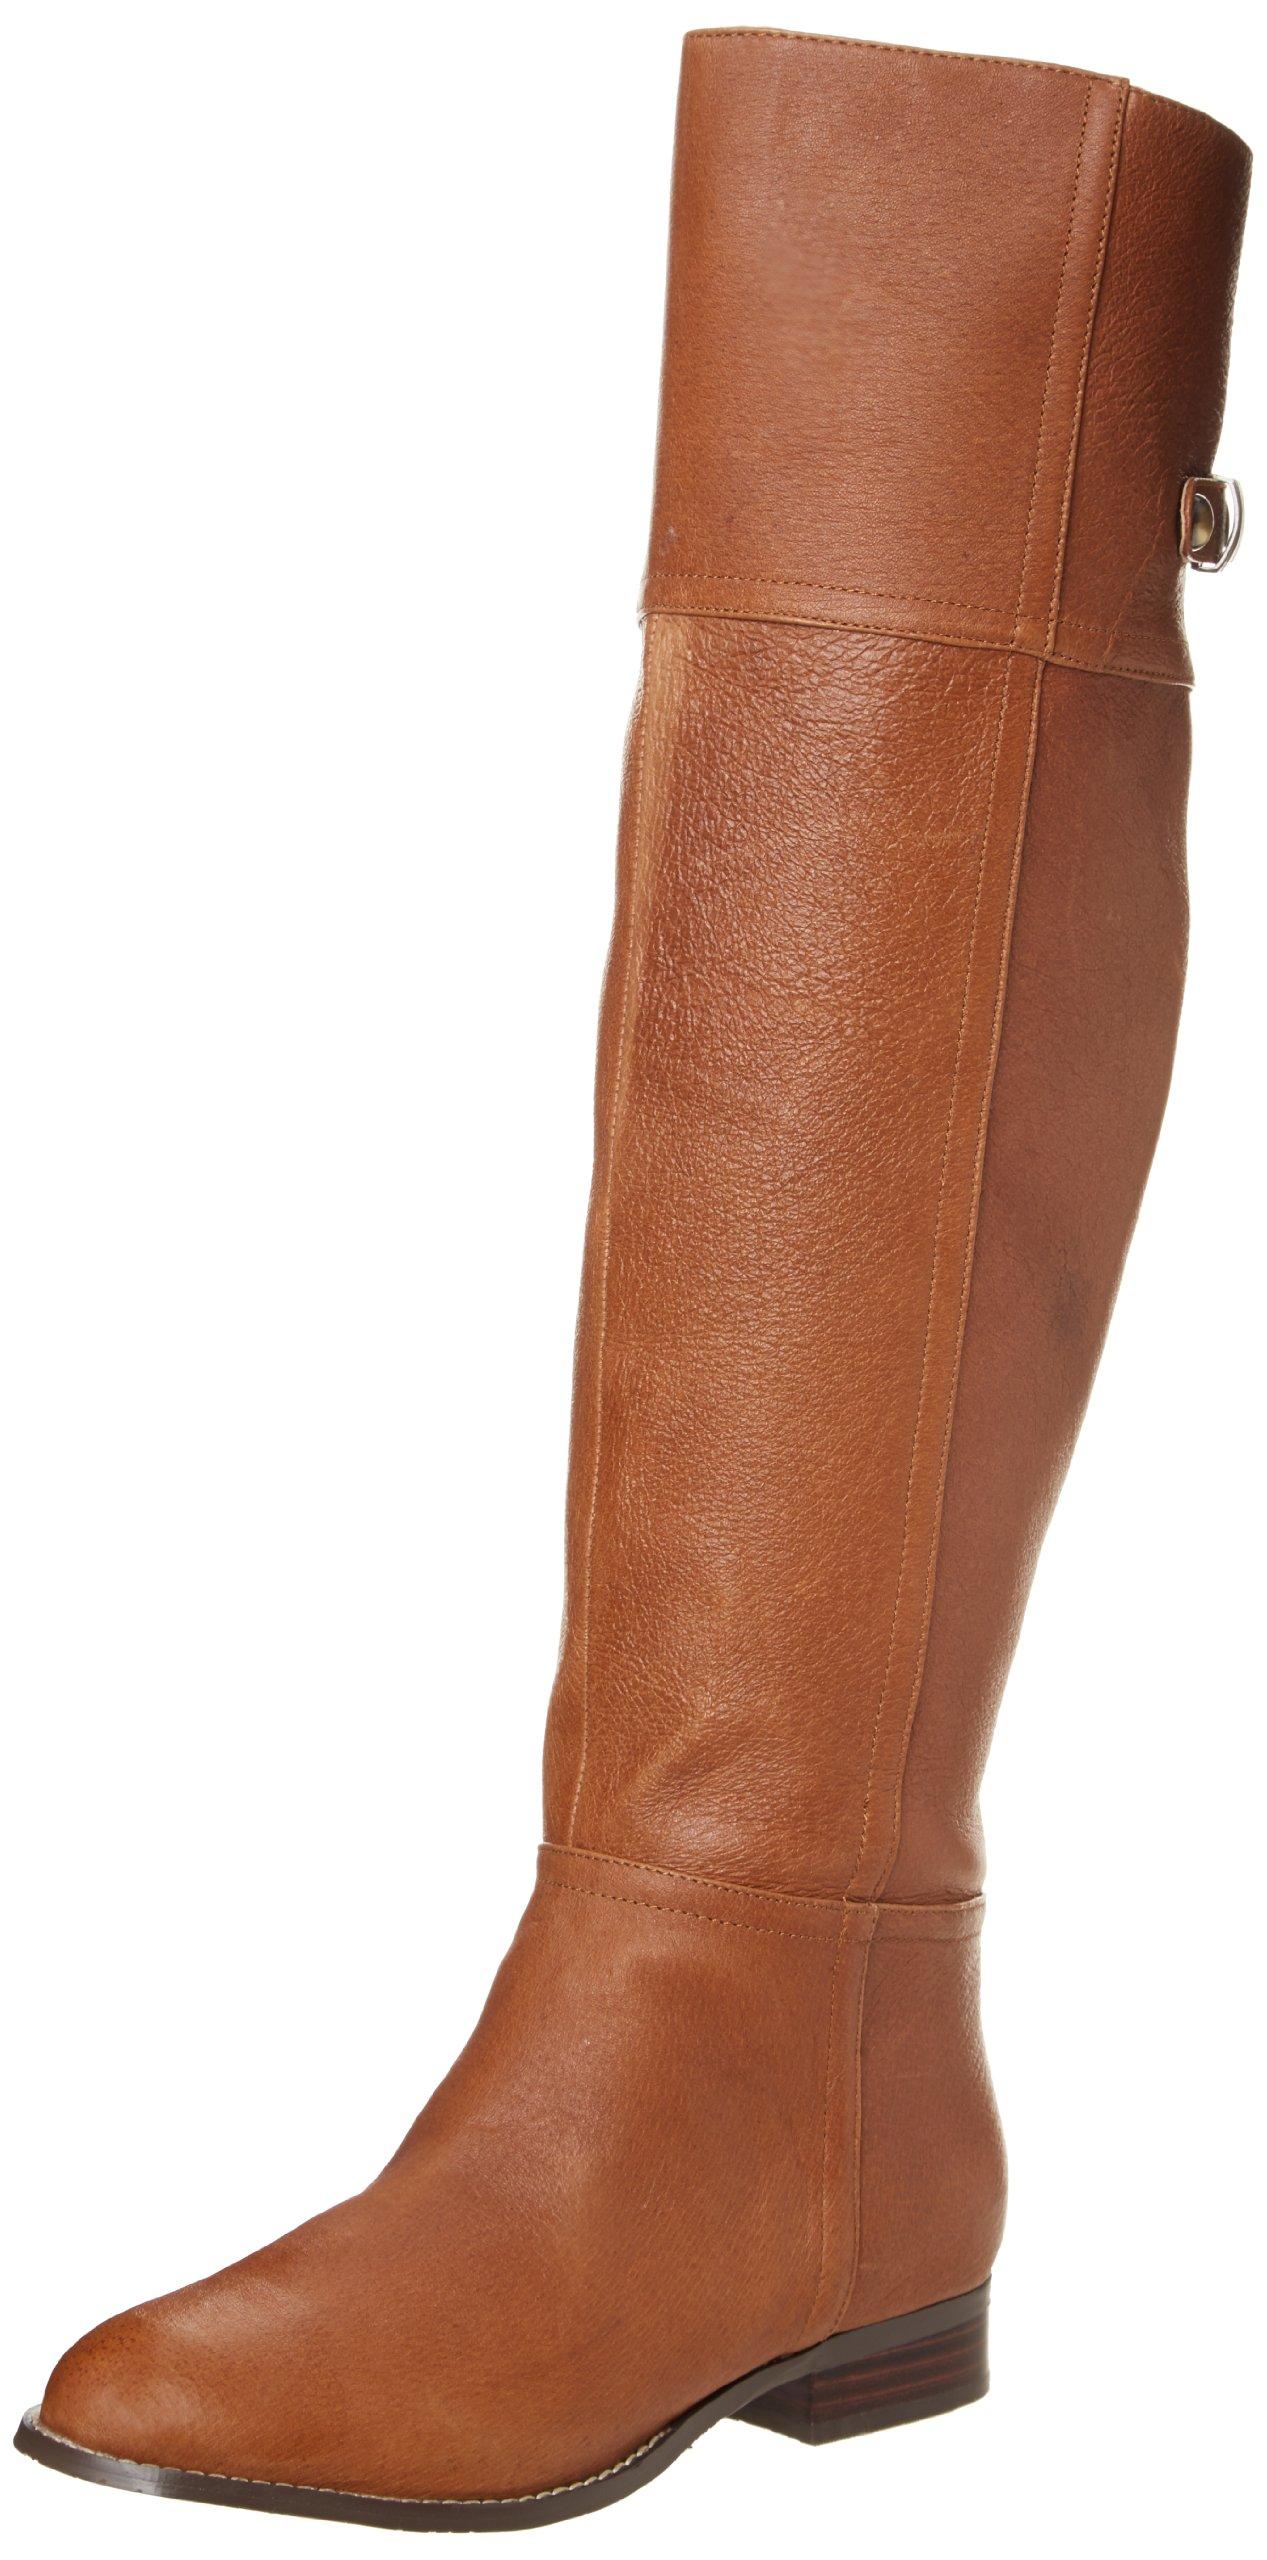 madden girl flash slouch boots